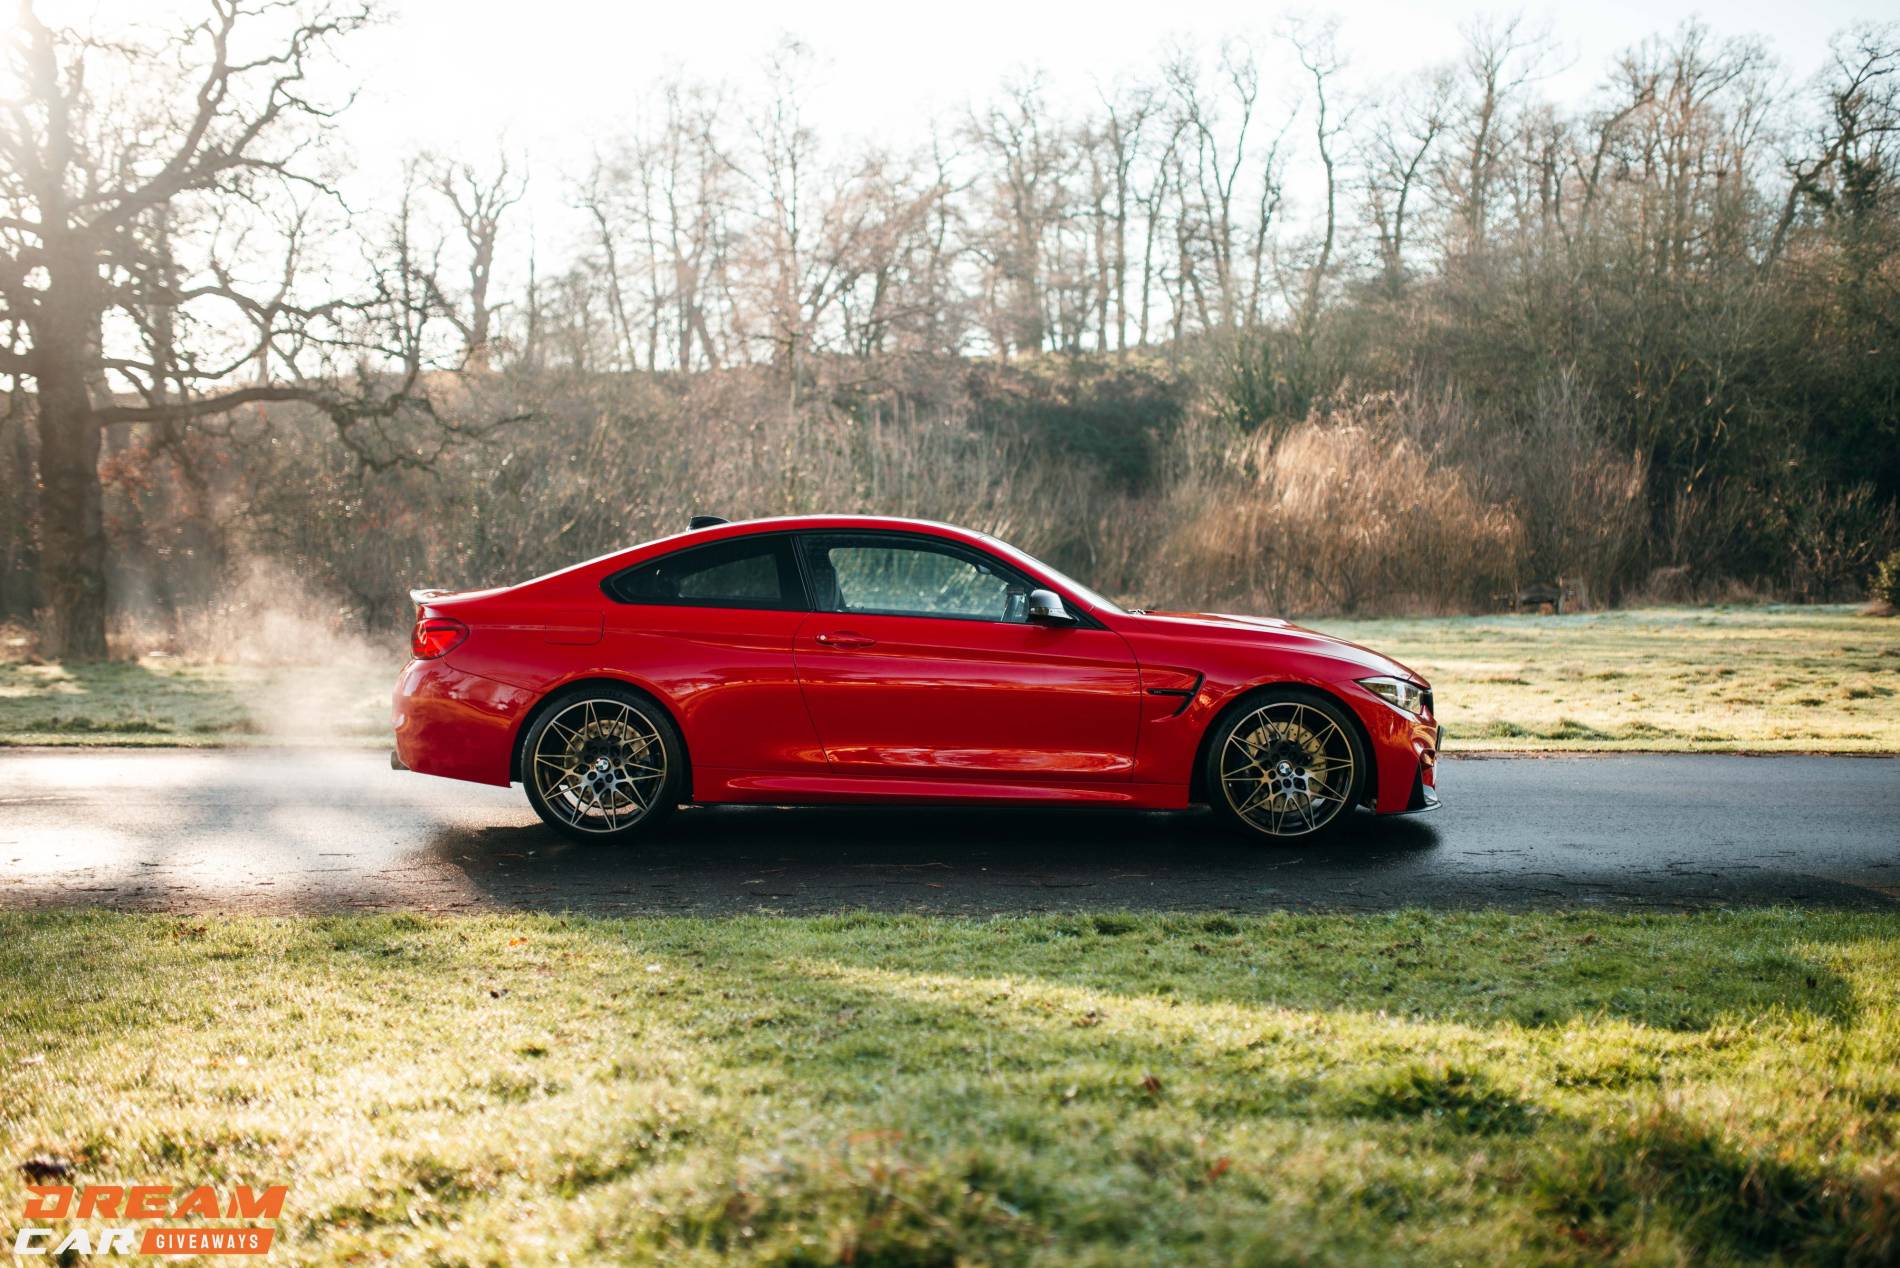 540HP BMW M4 Competition & £2000 OR £37,000 Tax-Free Cash